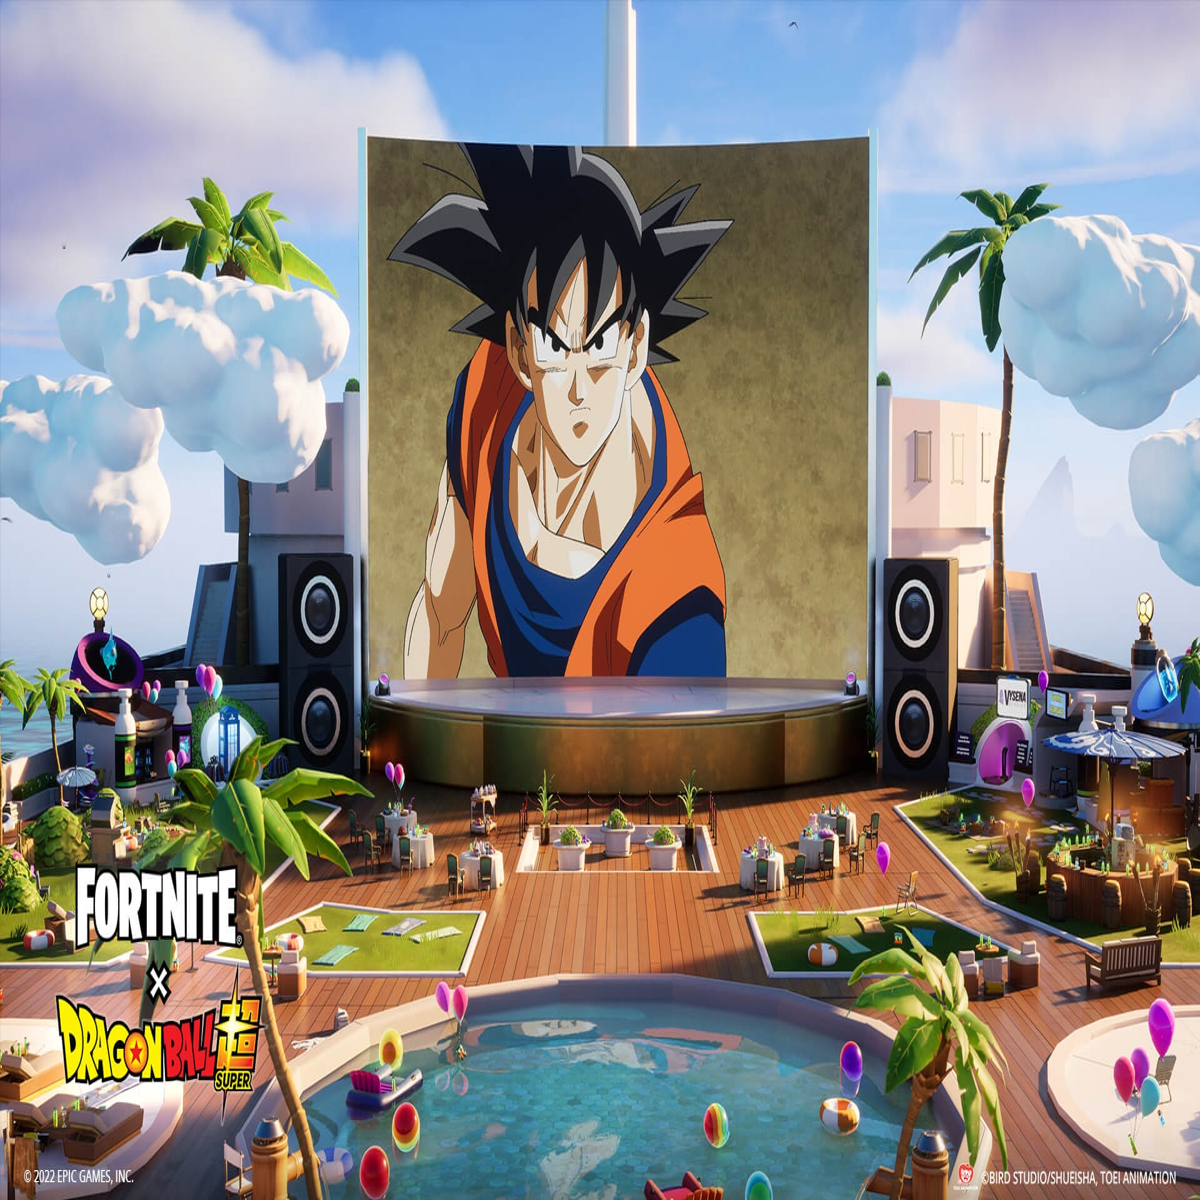 5 best Roblox games for Dragon Ball fans